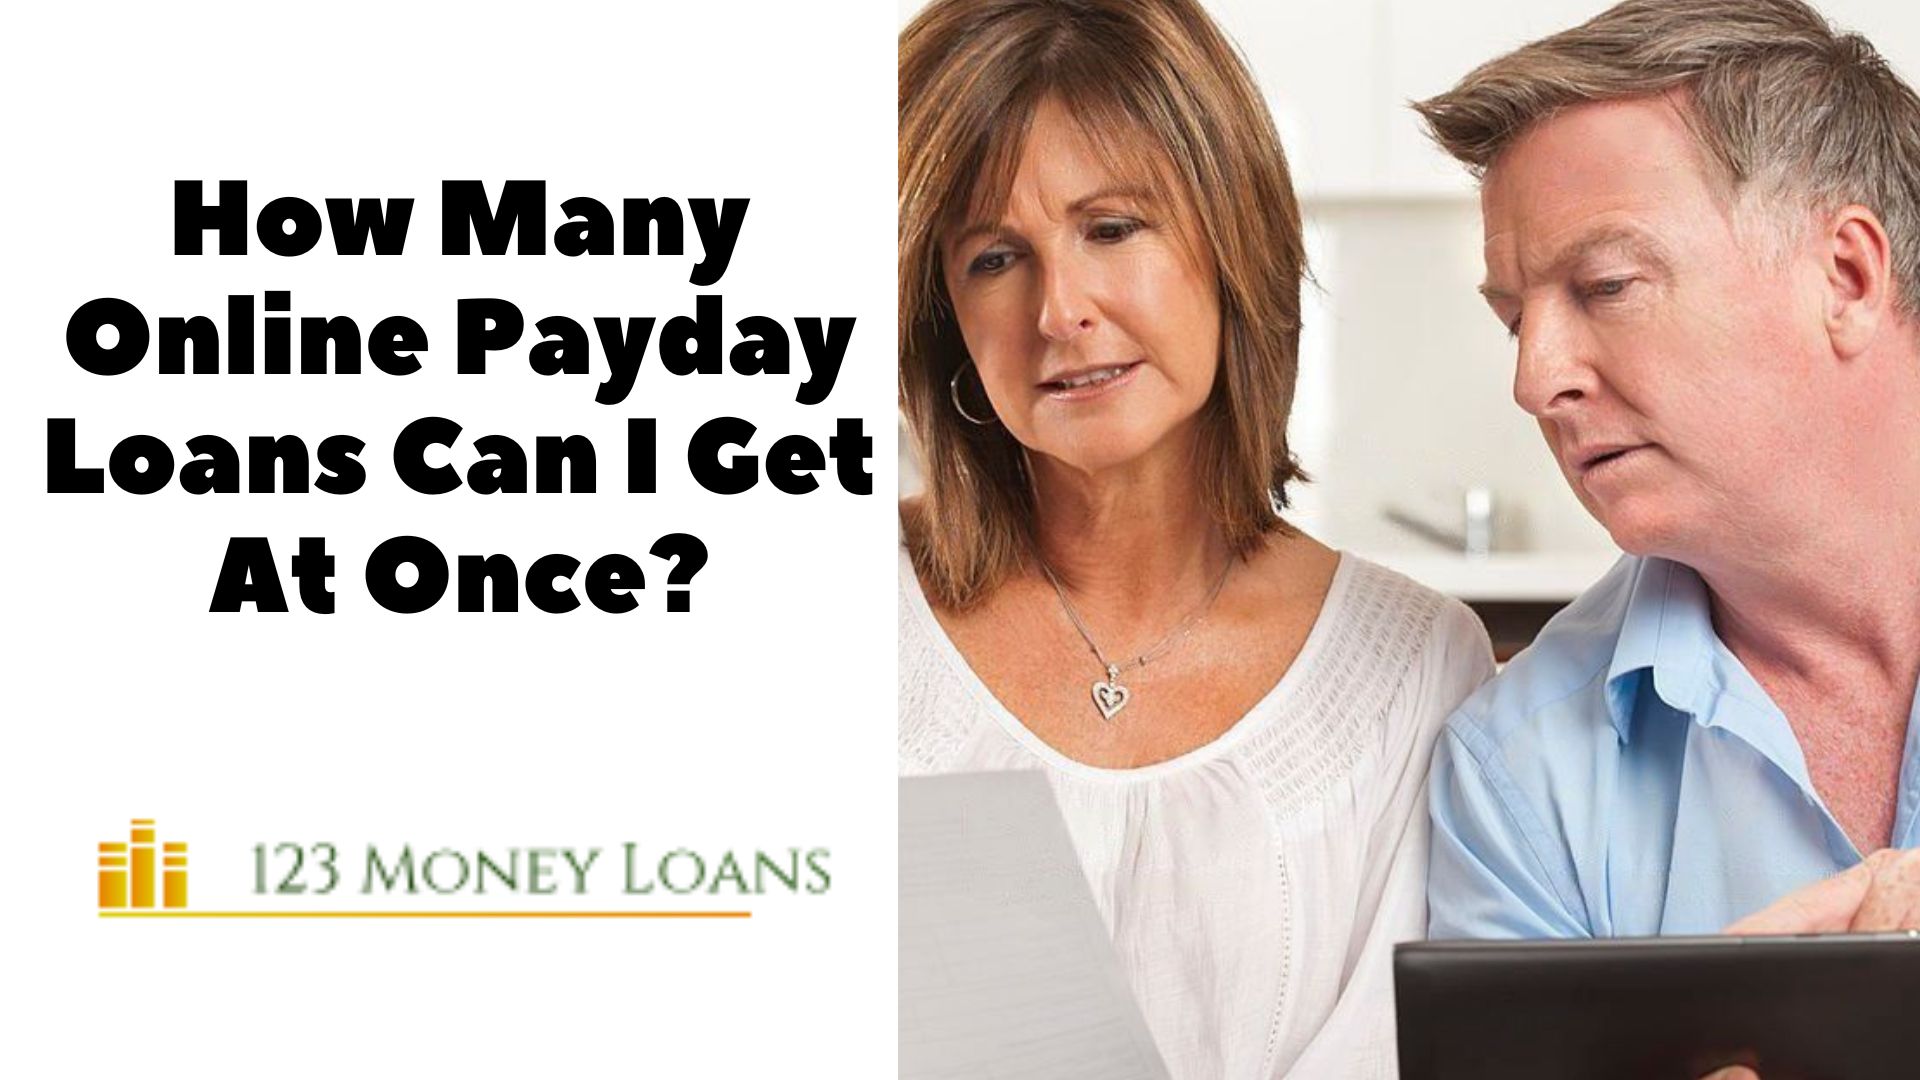 How Many Online Payday Loans Can I Get At Once?